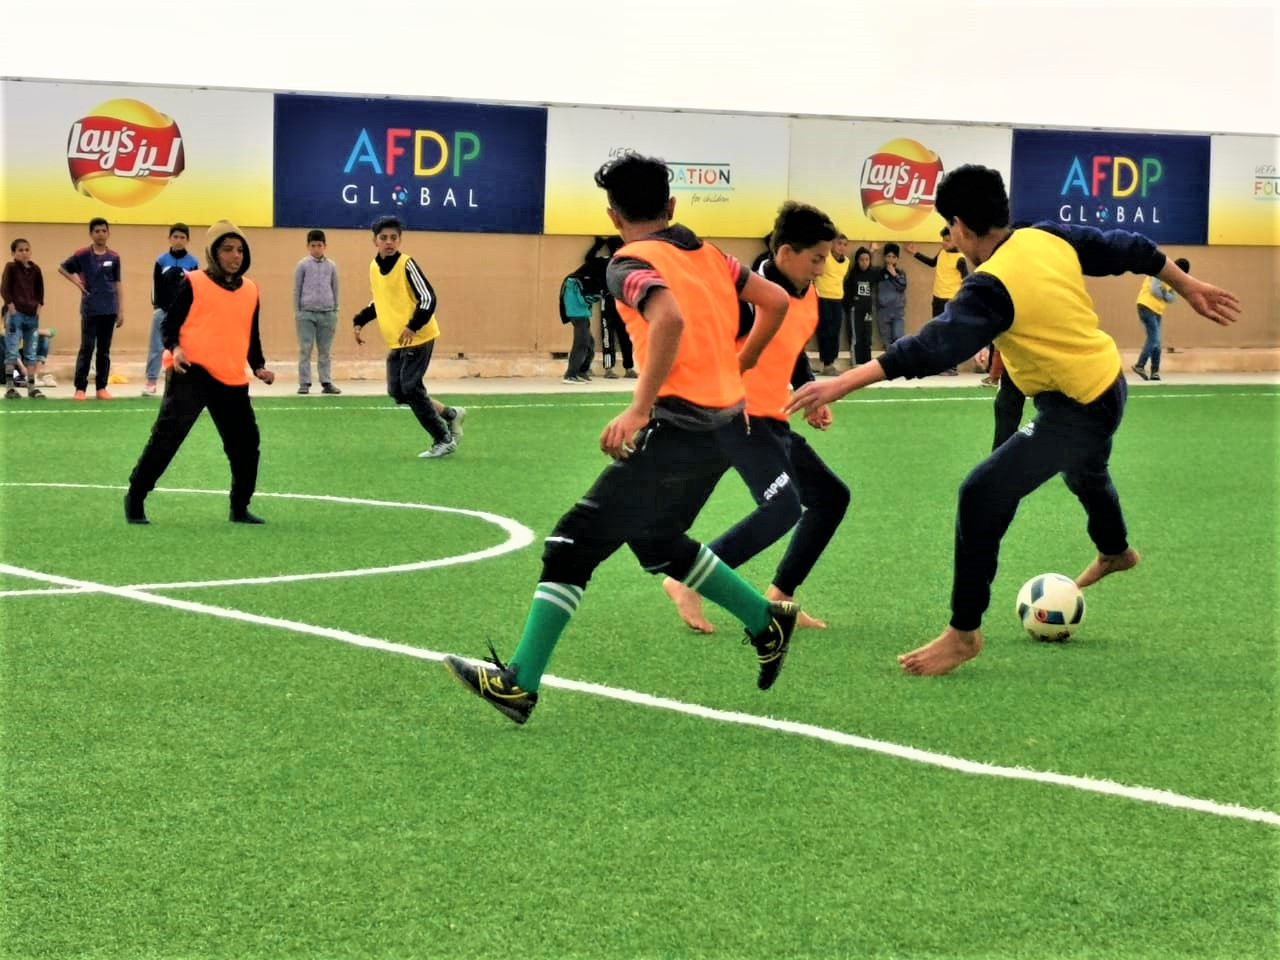 International football social enterprise AFDP Global held a tournament for young boys and girls at the Azraq Refugee Camp in Jordan ©AFDP Global